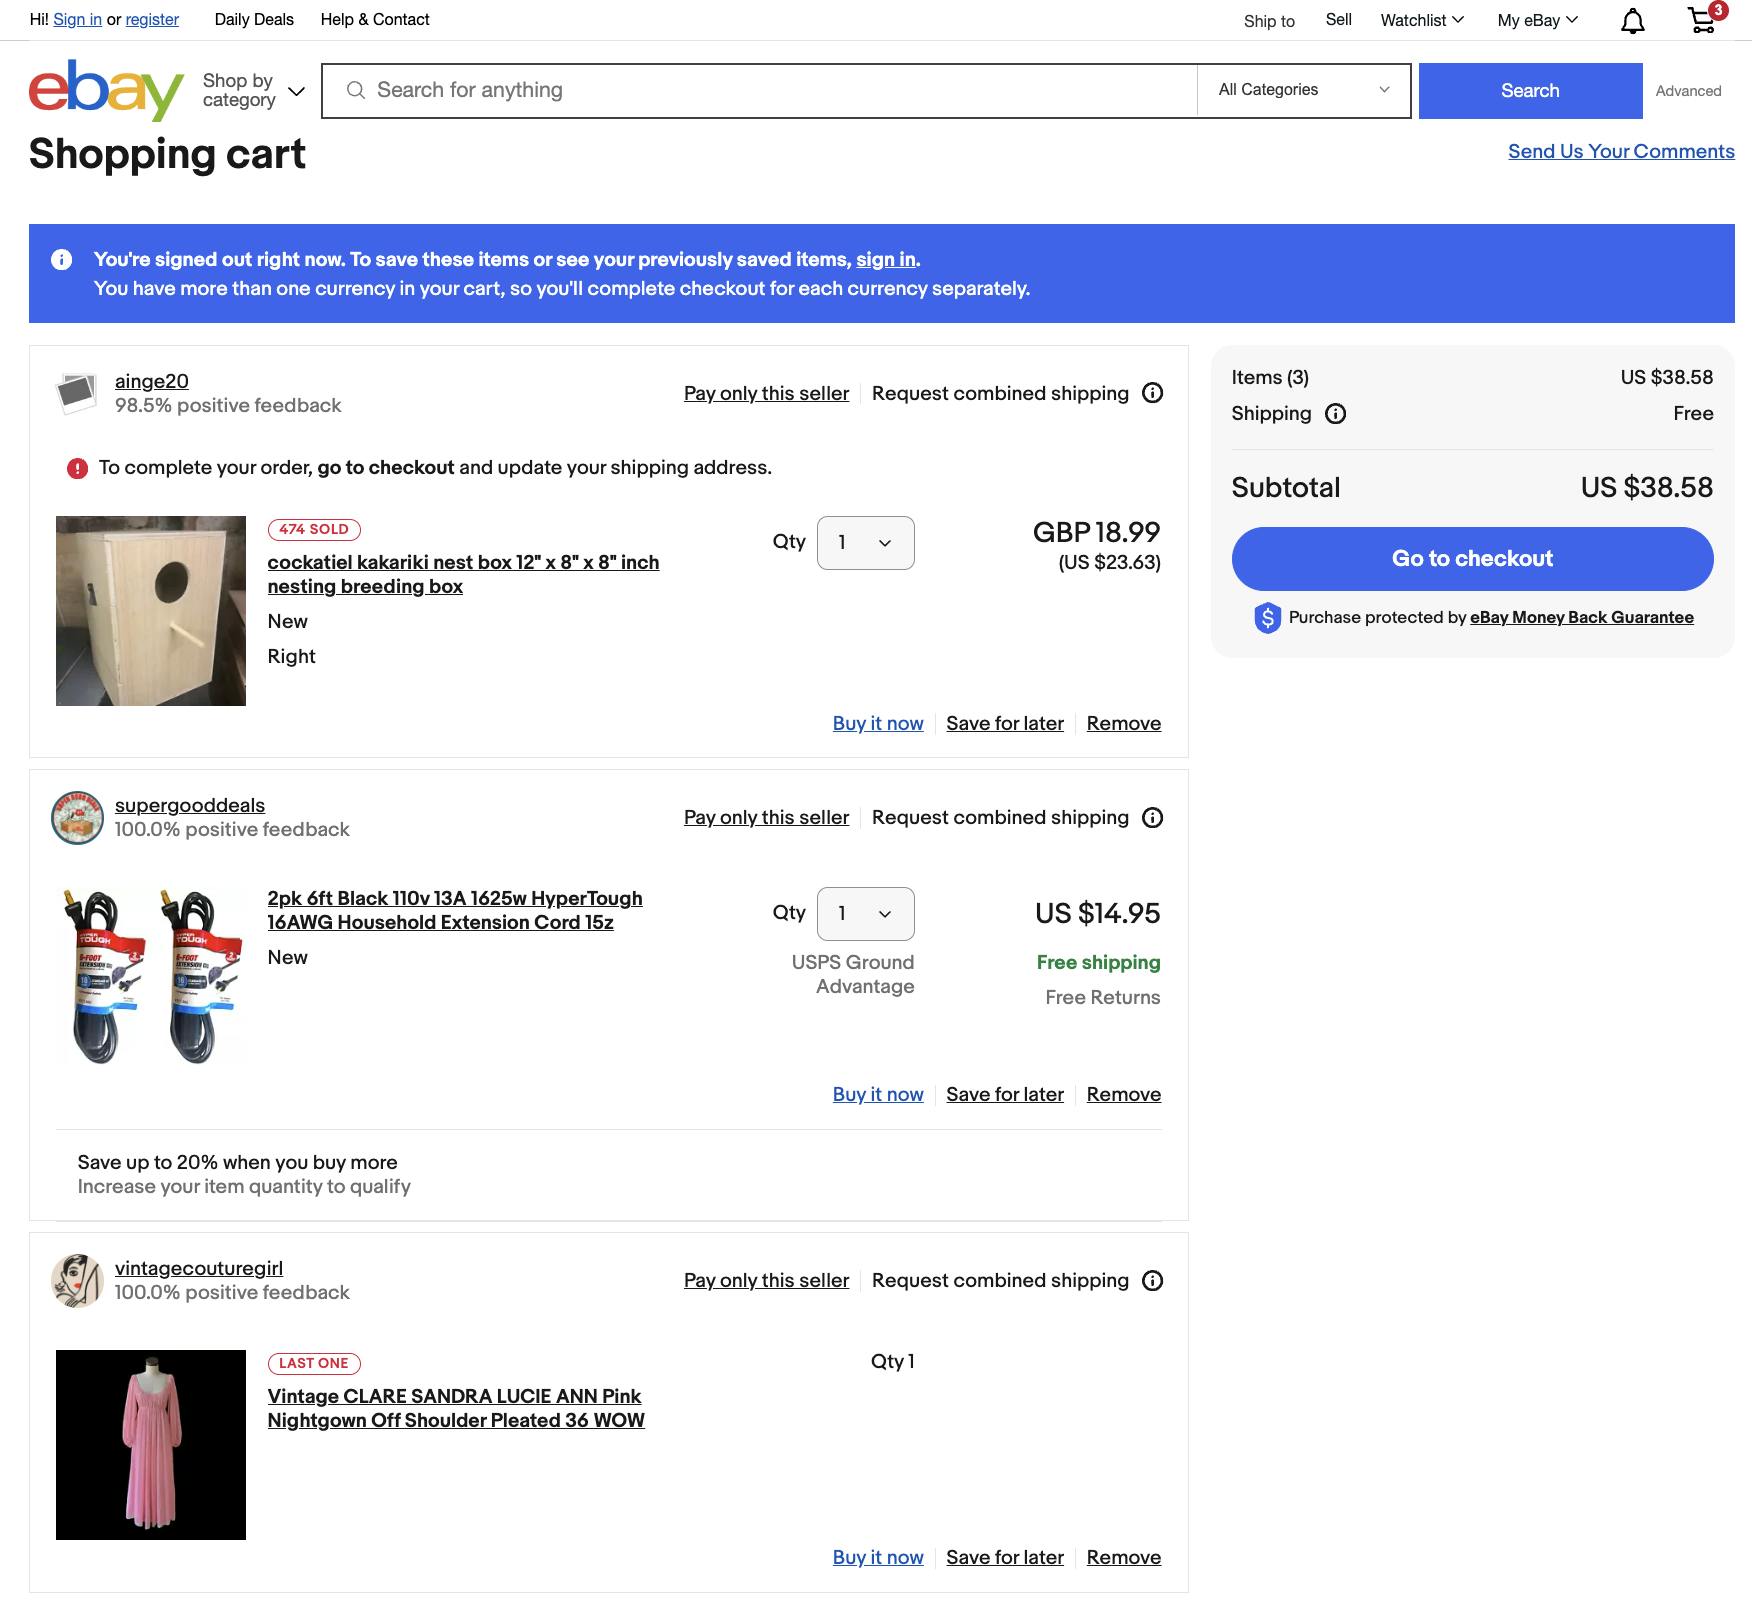 Screenshot of an eBay multi-vendor shopping cart with three items from three different vendors: a bird house, extension cords, and a vintage dress.